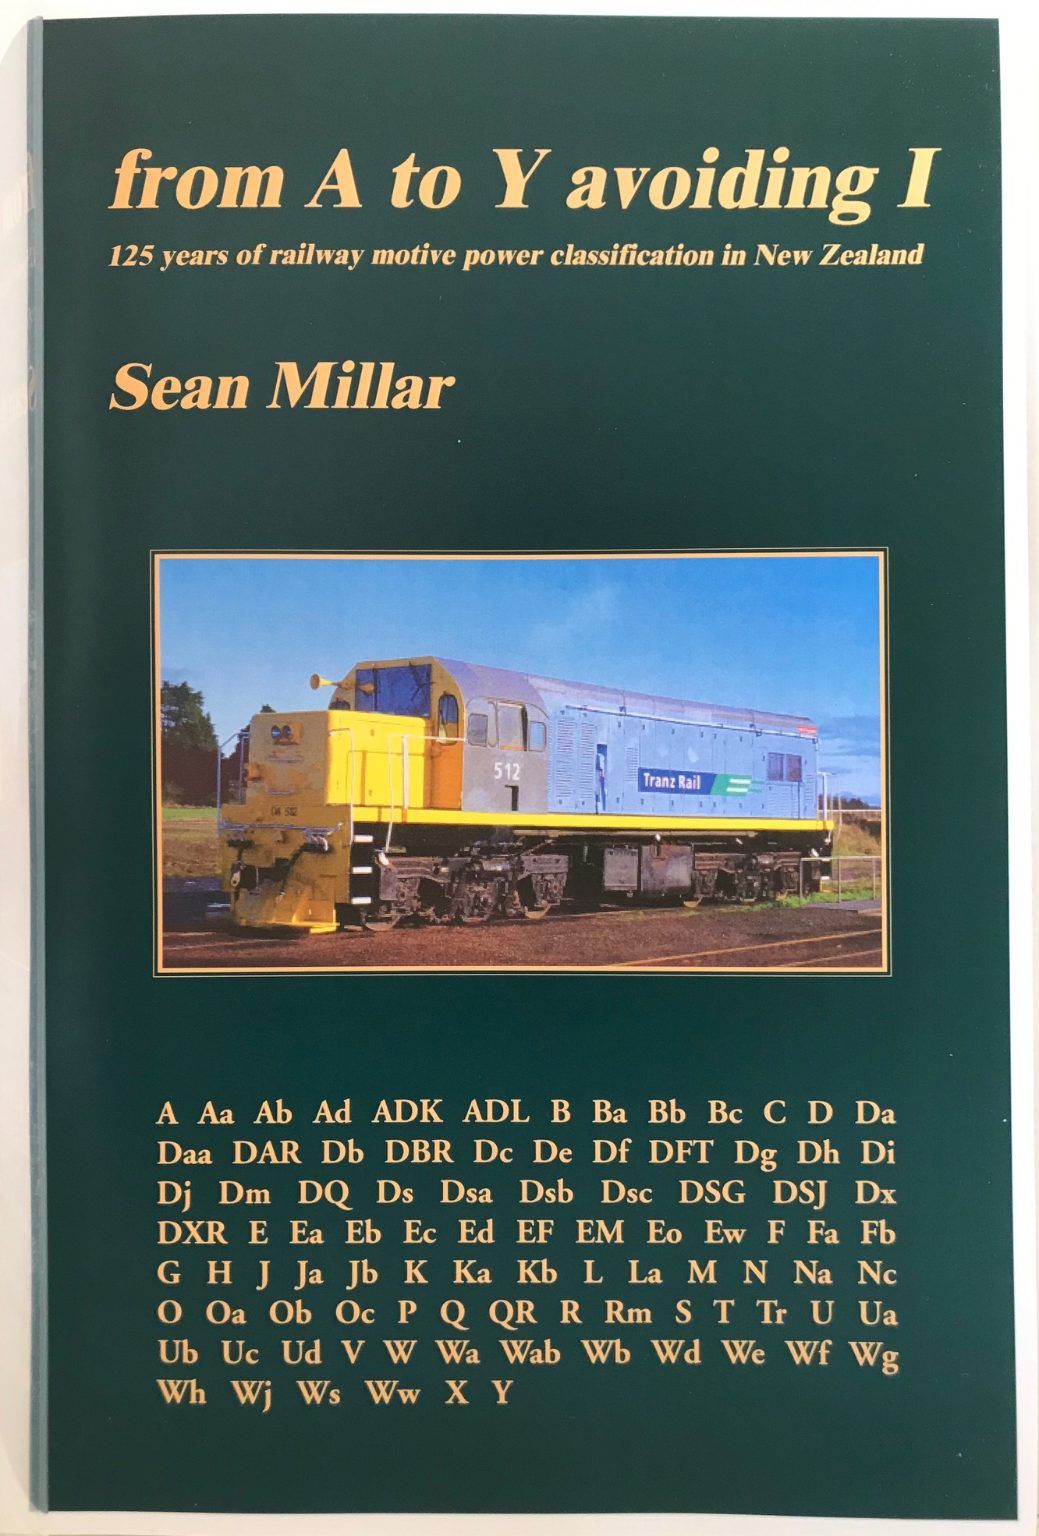 FROM A TO Y AVOIDING I: 125 Years of Railway Motive Power Classification In NZ